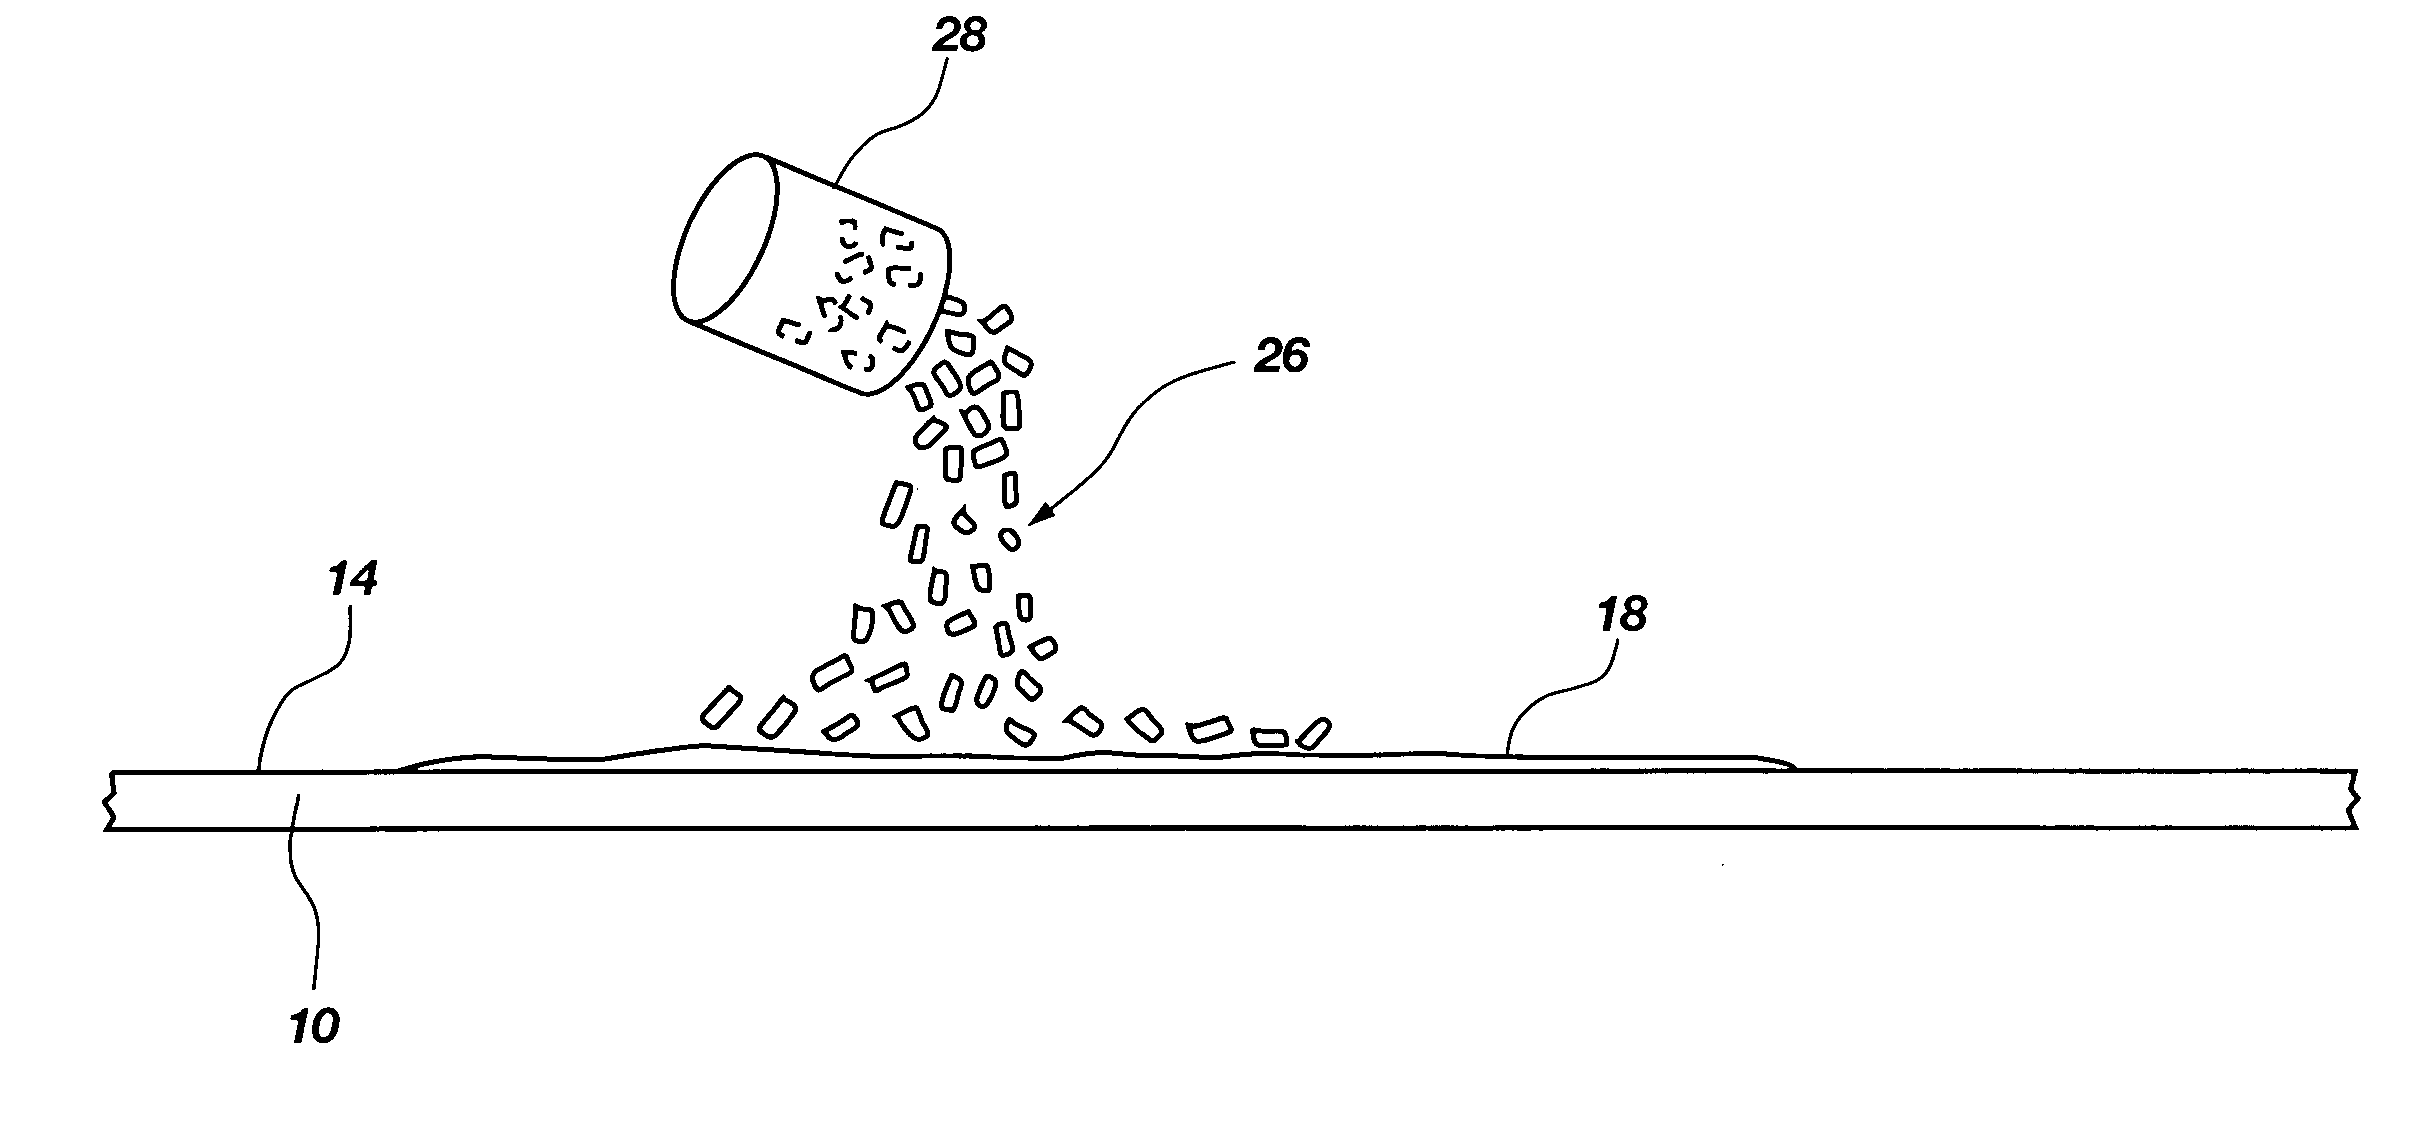 Method for cleaning fluid spills using biodegradable absorbent material and for transporting the same